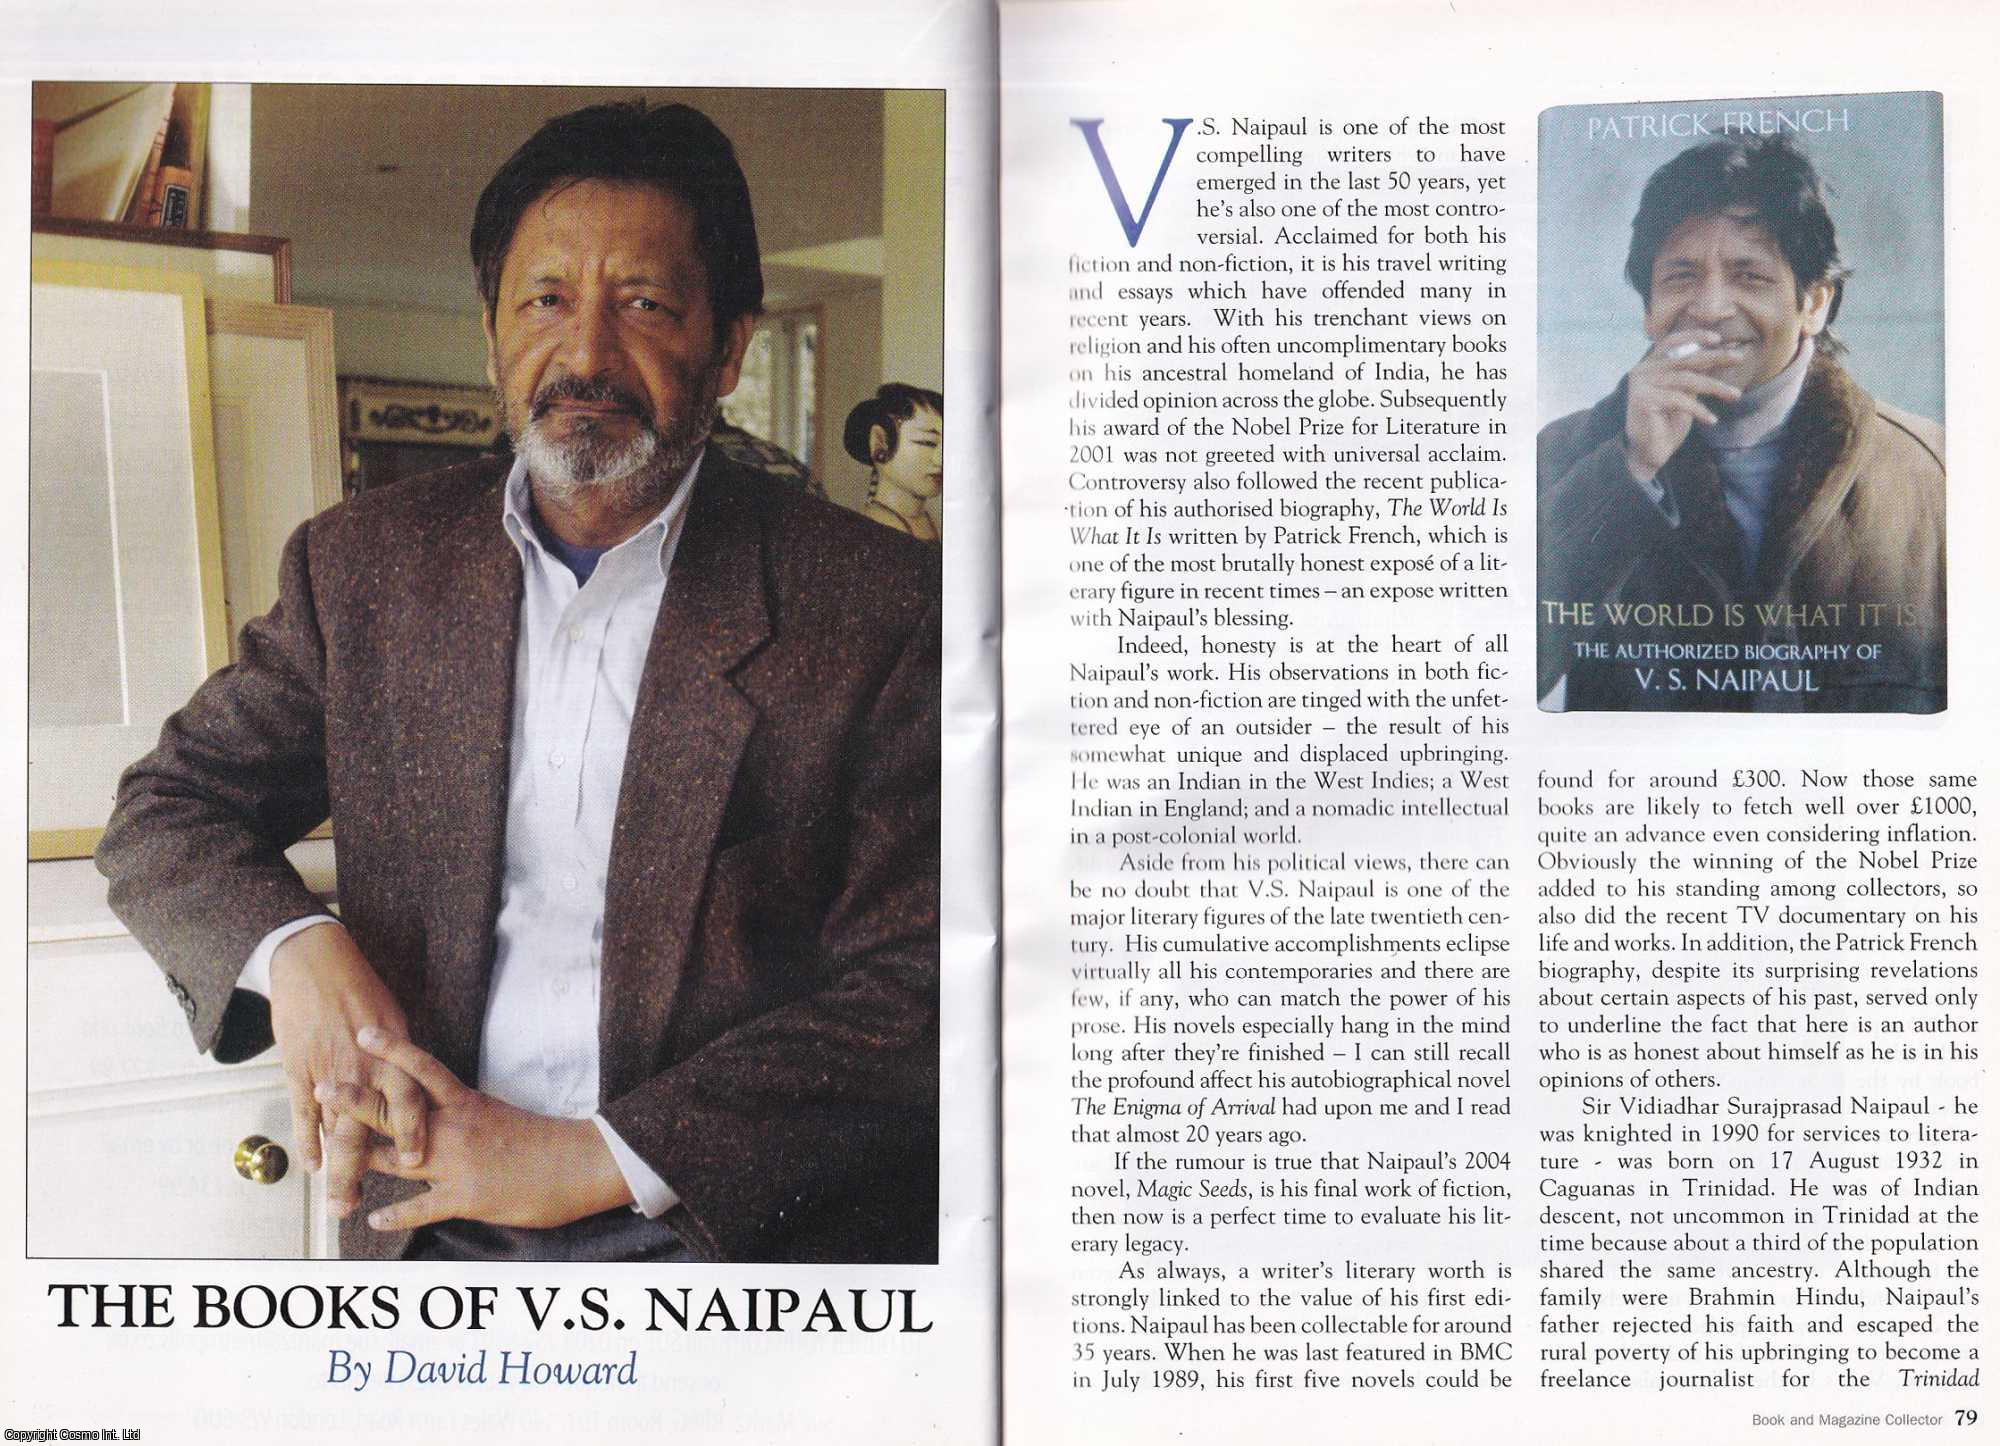 David Howard - The Books of Sir Vidiadhar Surajprasad Naipaul. This is an original article separated from an issue of The Book & Magazine Collector publication, 2009.